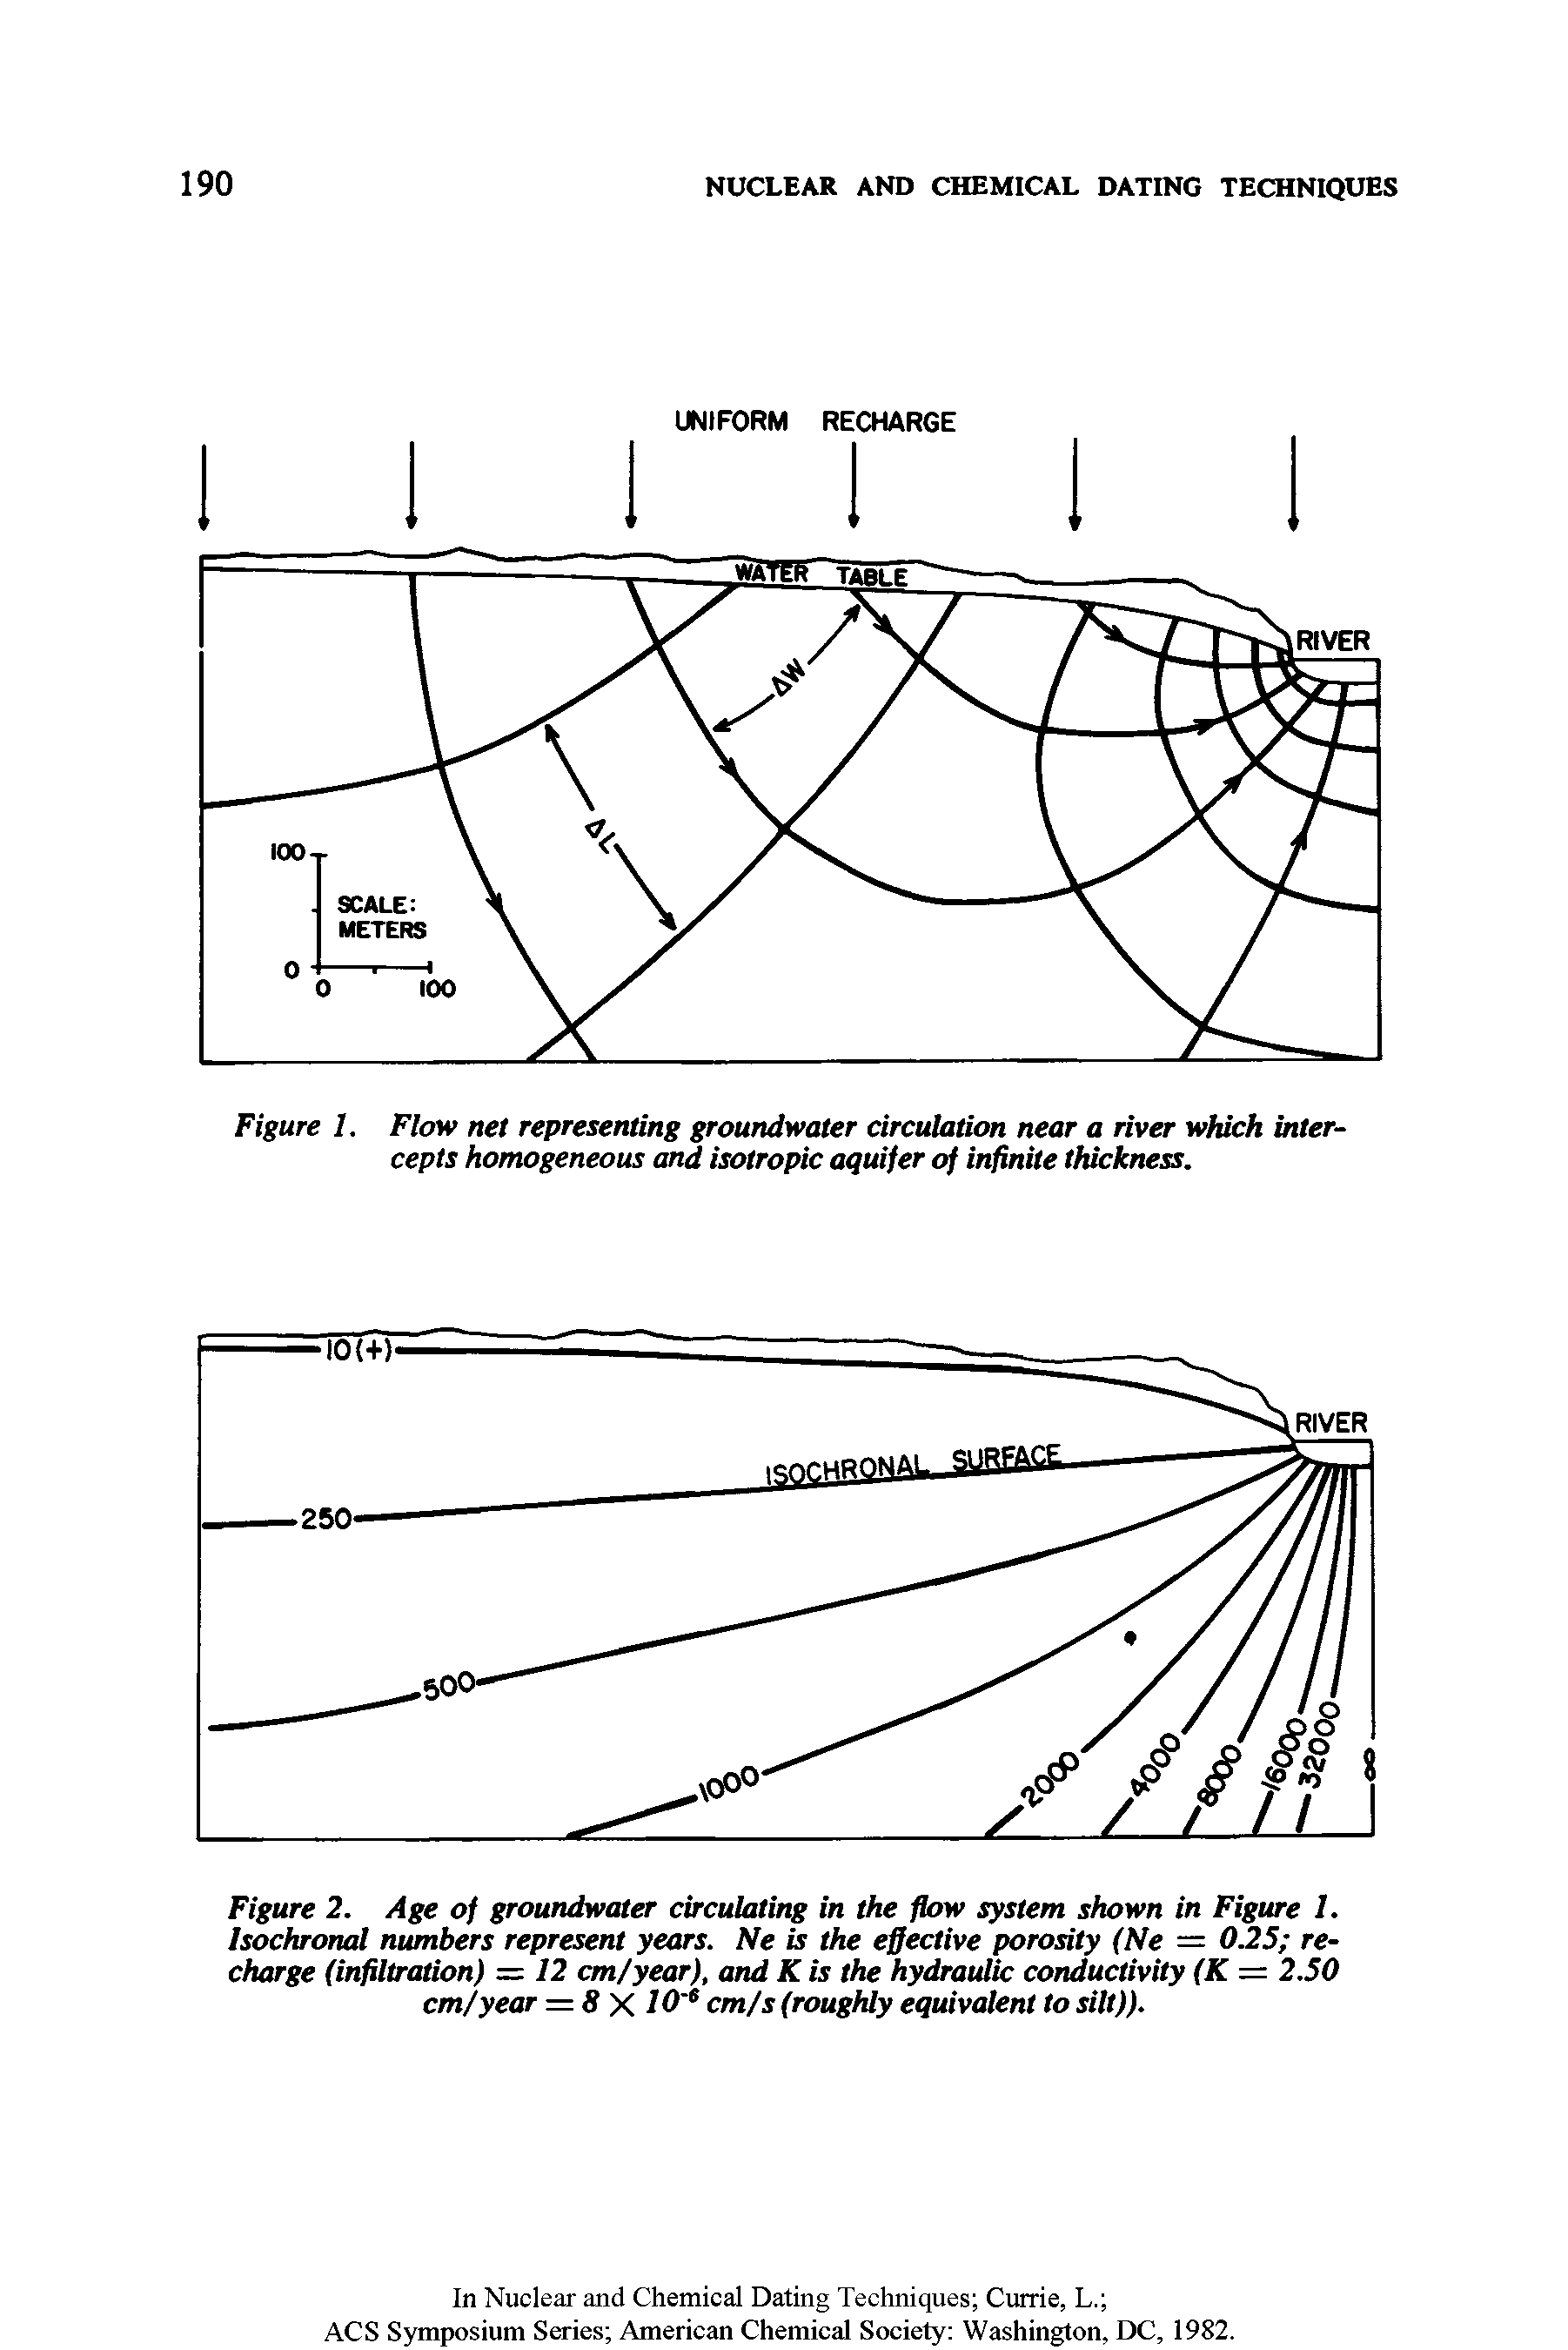 Figure 2. Age of groundwater circulating in the flow system shown in Figure 1. Isochronal numbers represent years. Ne is the effective porosity (Ne = 0.25 recharge (infiltration) = 12 cm/year), and K is the hydraulic conductivity (K = 2.50 cm/year = 8 X 10 e cm/s (roughly equivalent to silt)).